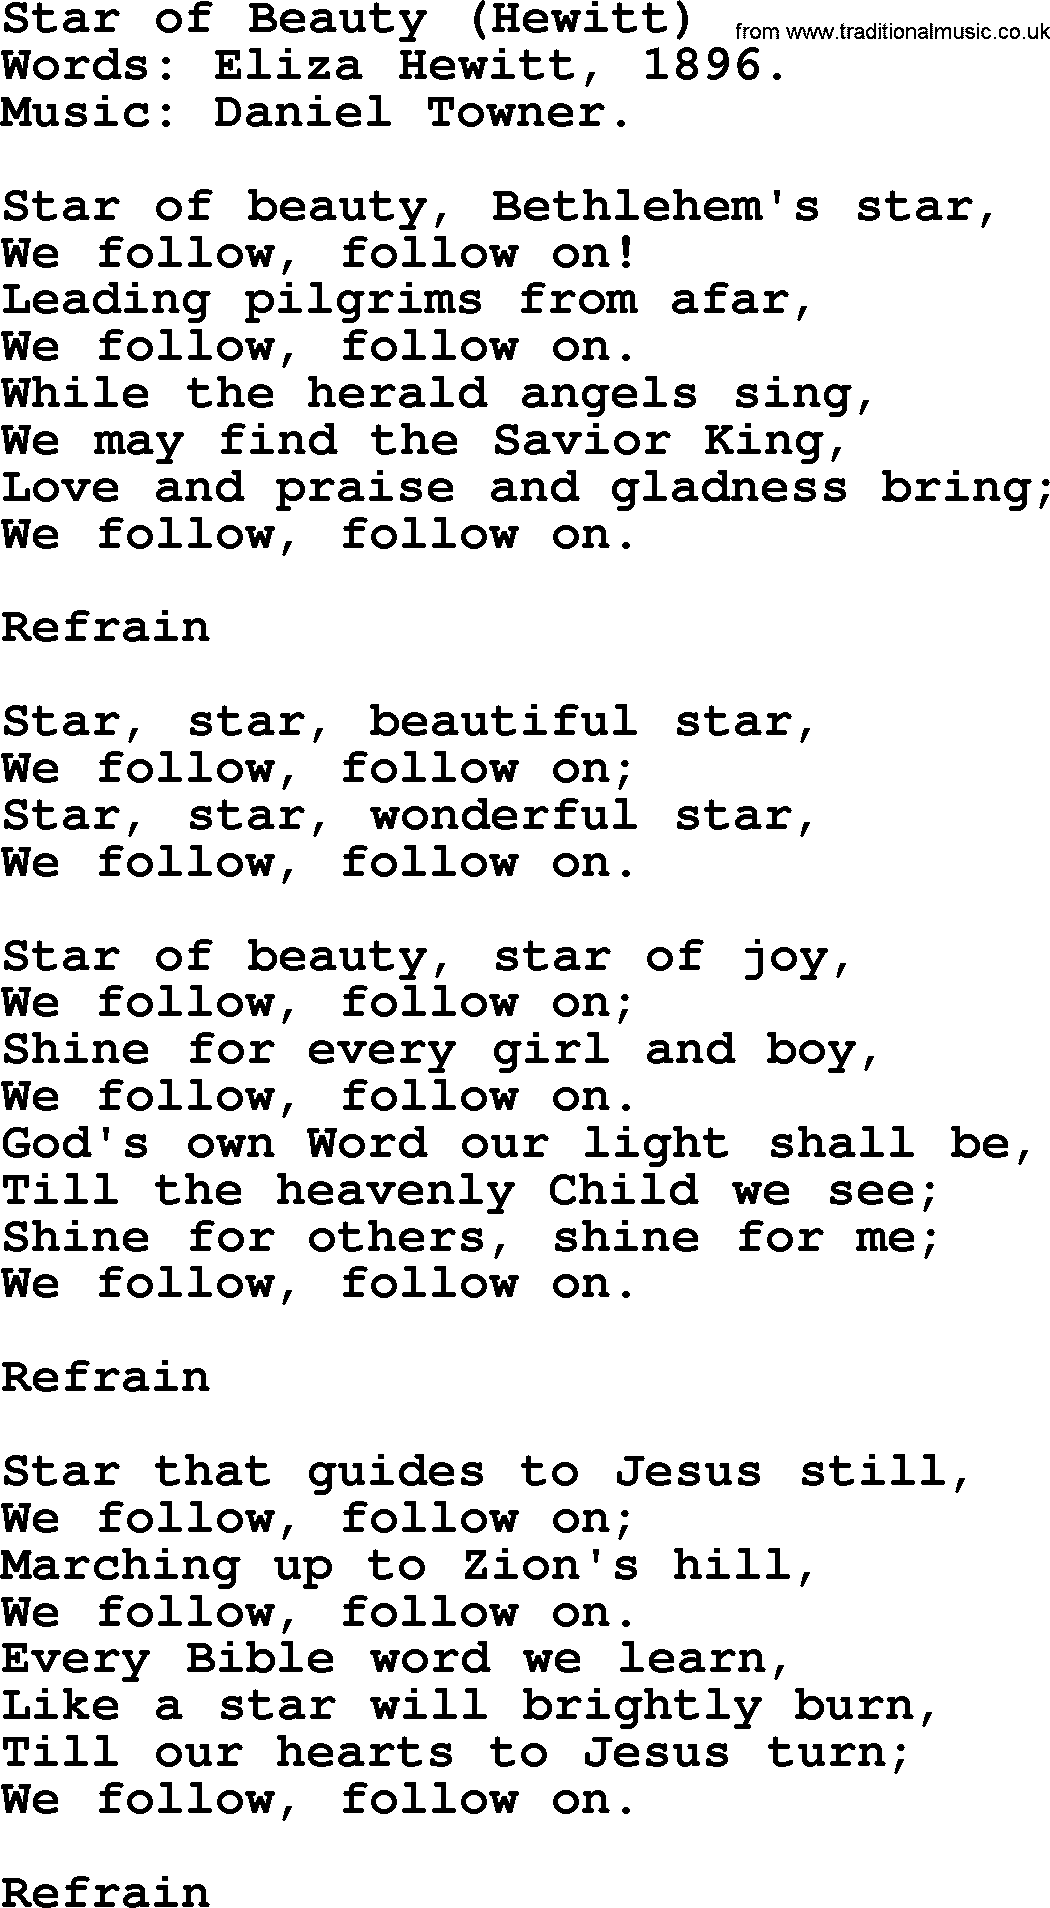 Christmas Hymns, Carols and Songs, title: Star Of Beauty (hewitt), lyrics with PDF